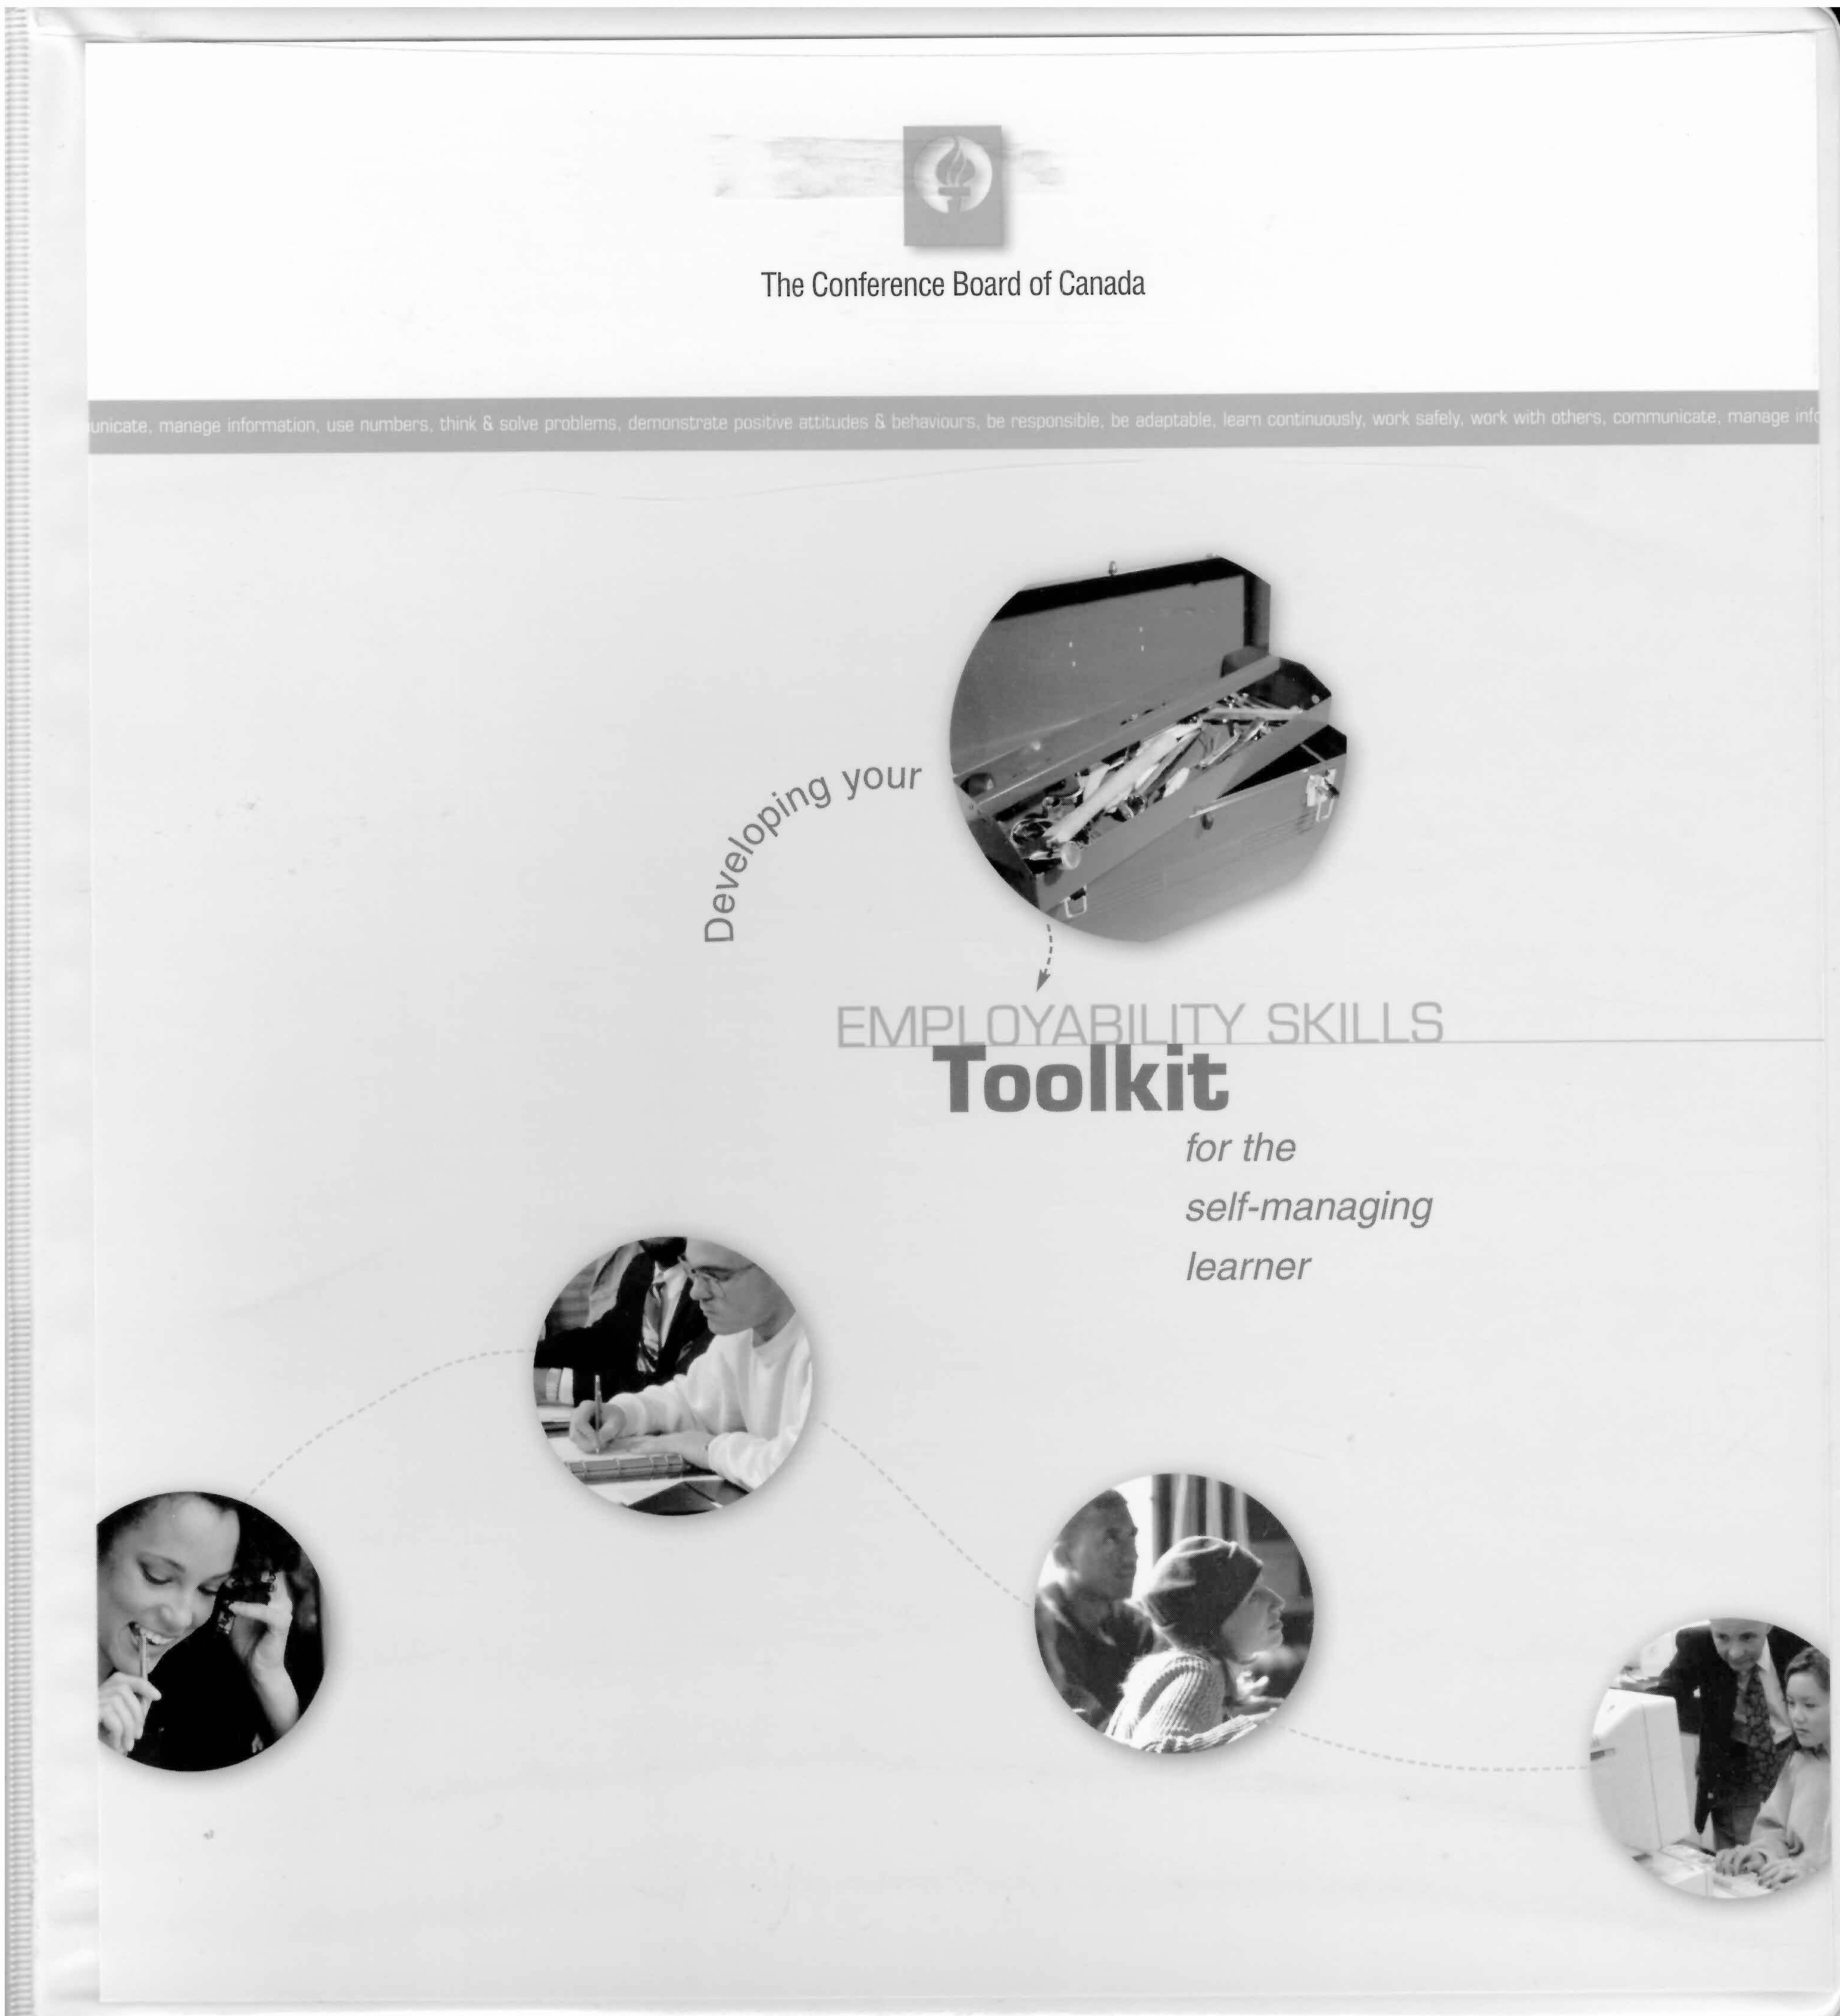 Developing your employability skills toolkit for the self-managing learner.